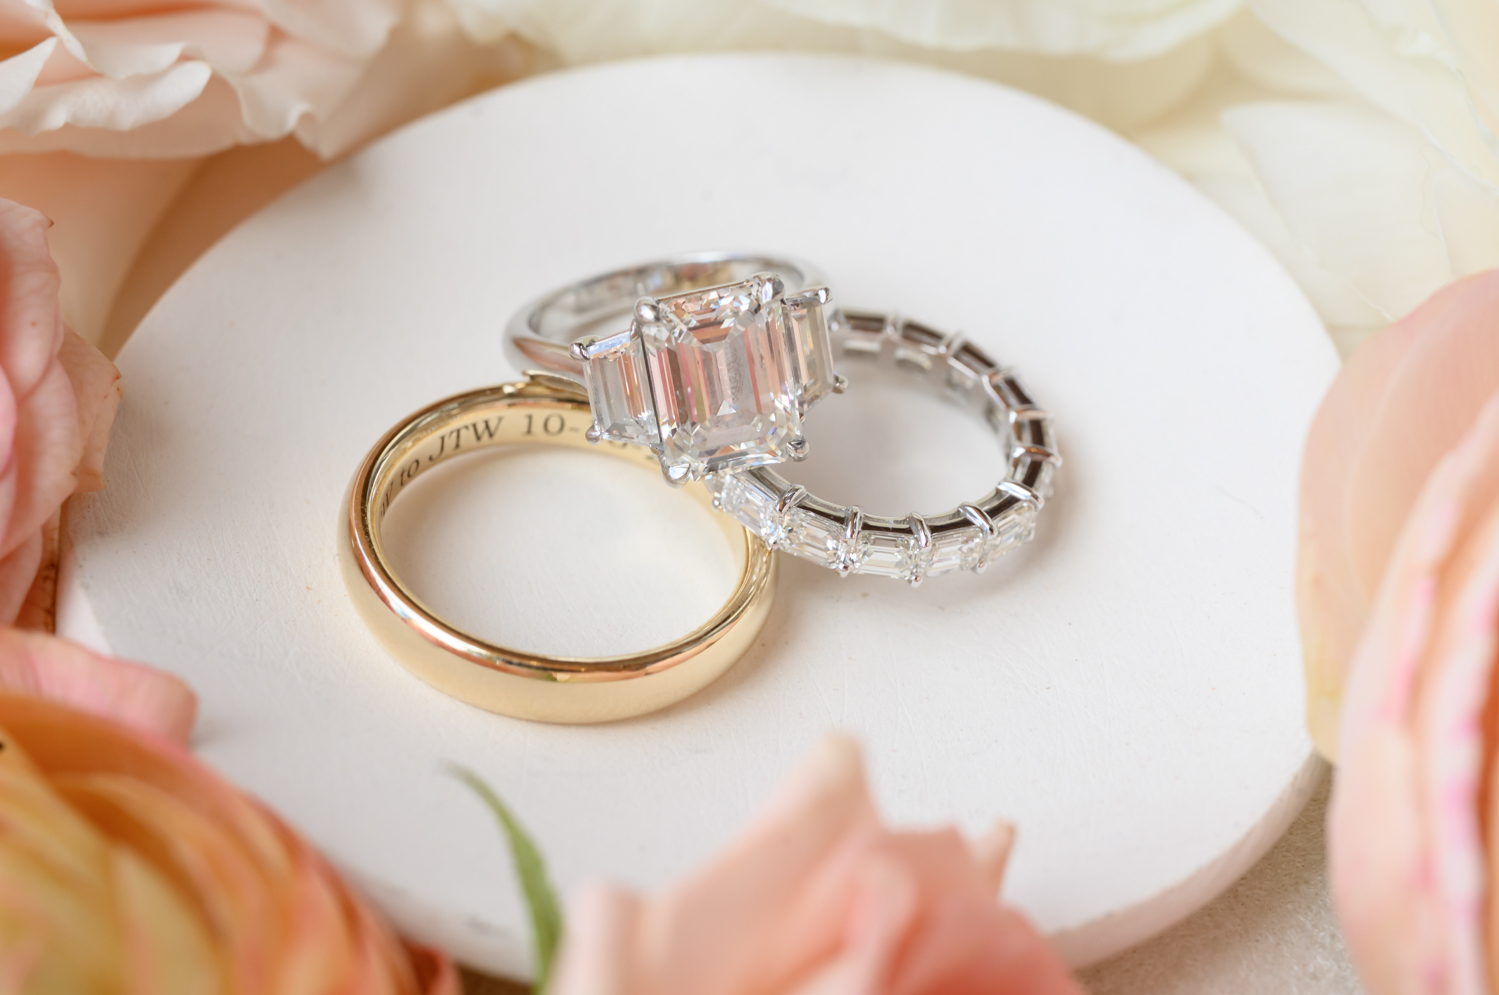 groom's wedding band, and bride's diamond engagement ring and wedding band 